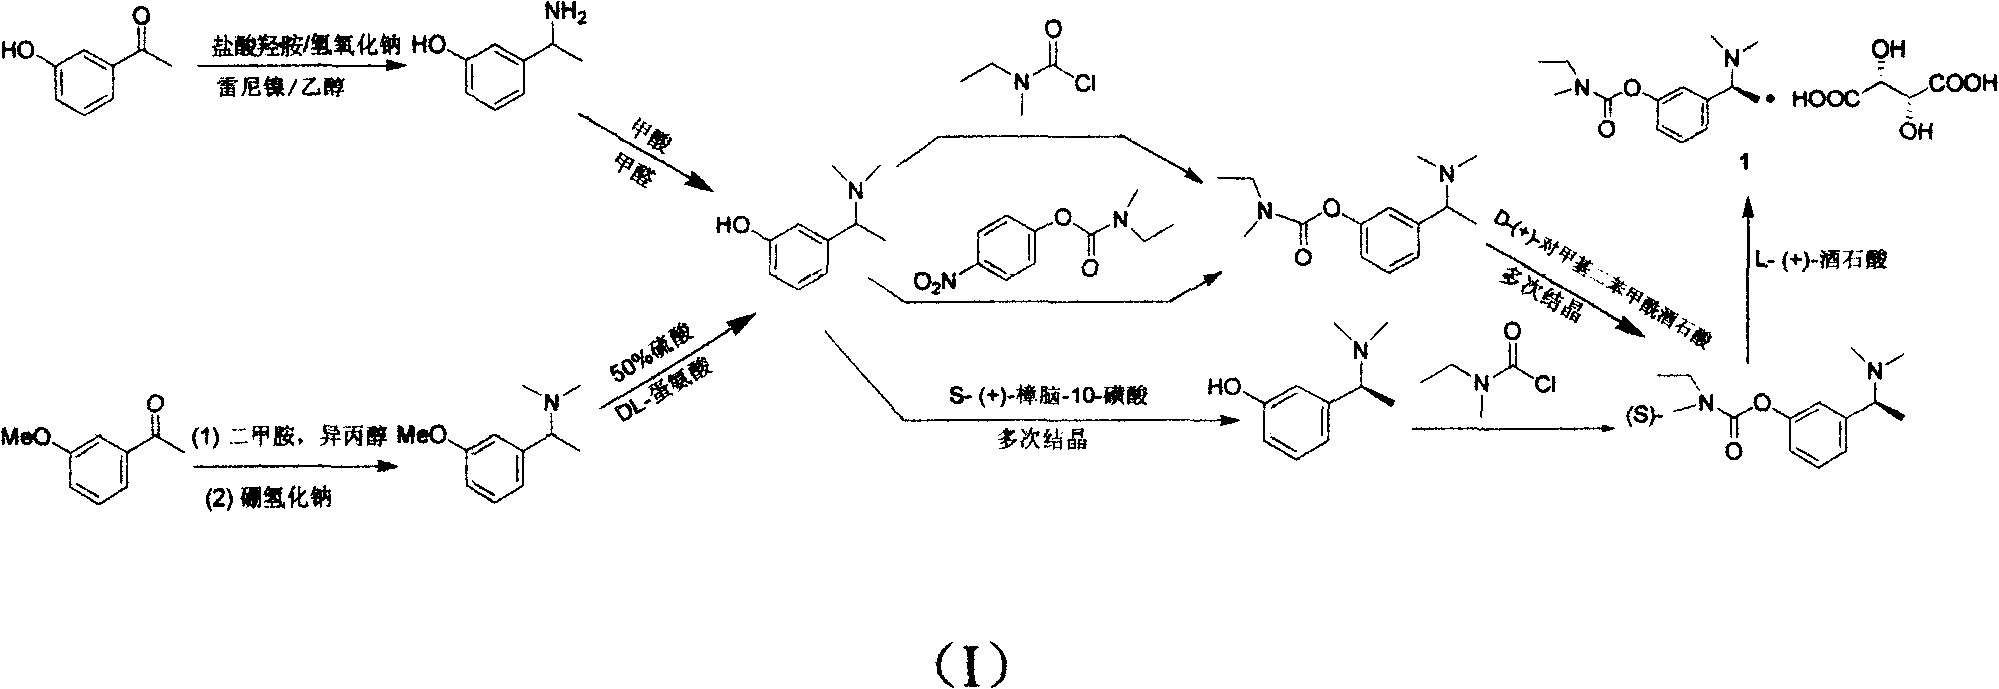 Method for synthesis of rivastigmine